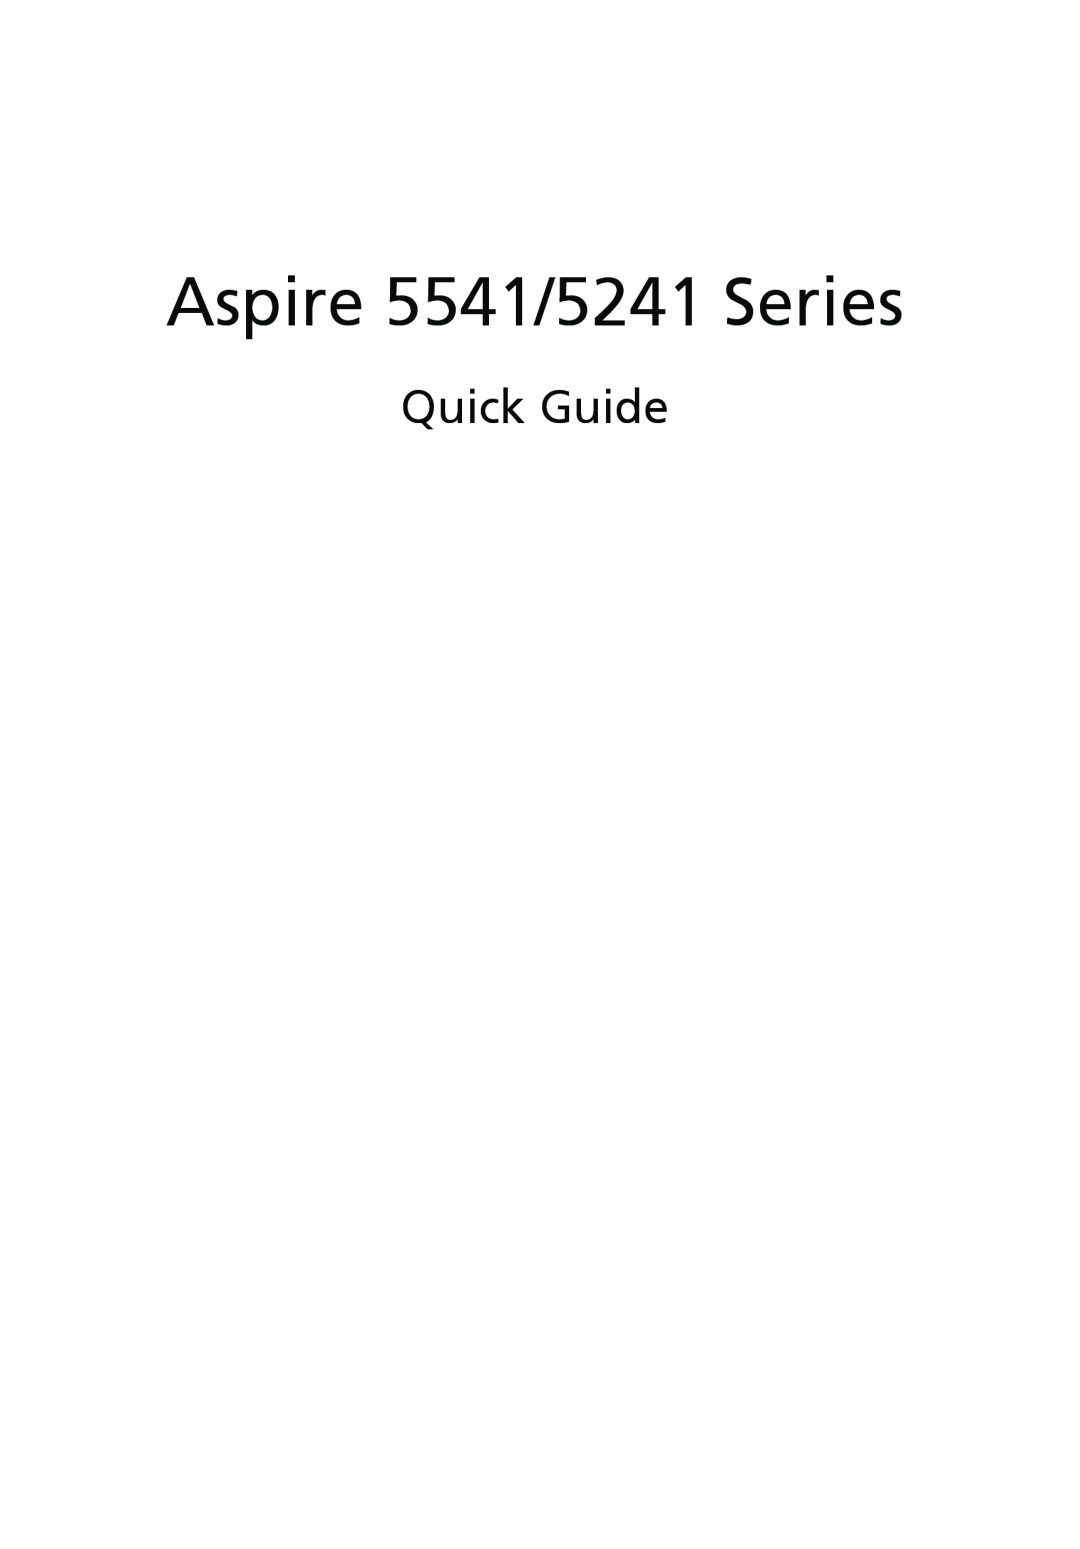 Acer 5541 Series manual Quick Guide, Aspire 5541/5241 Series 